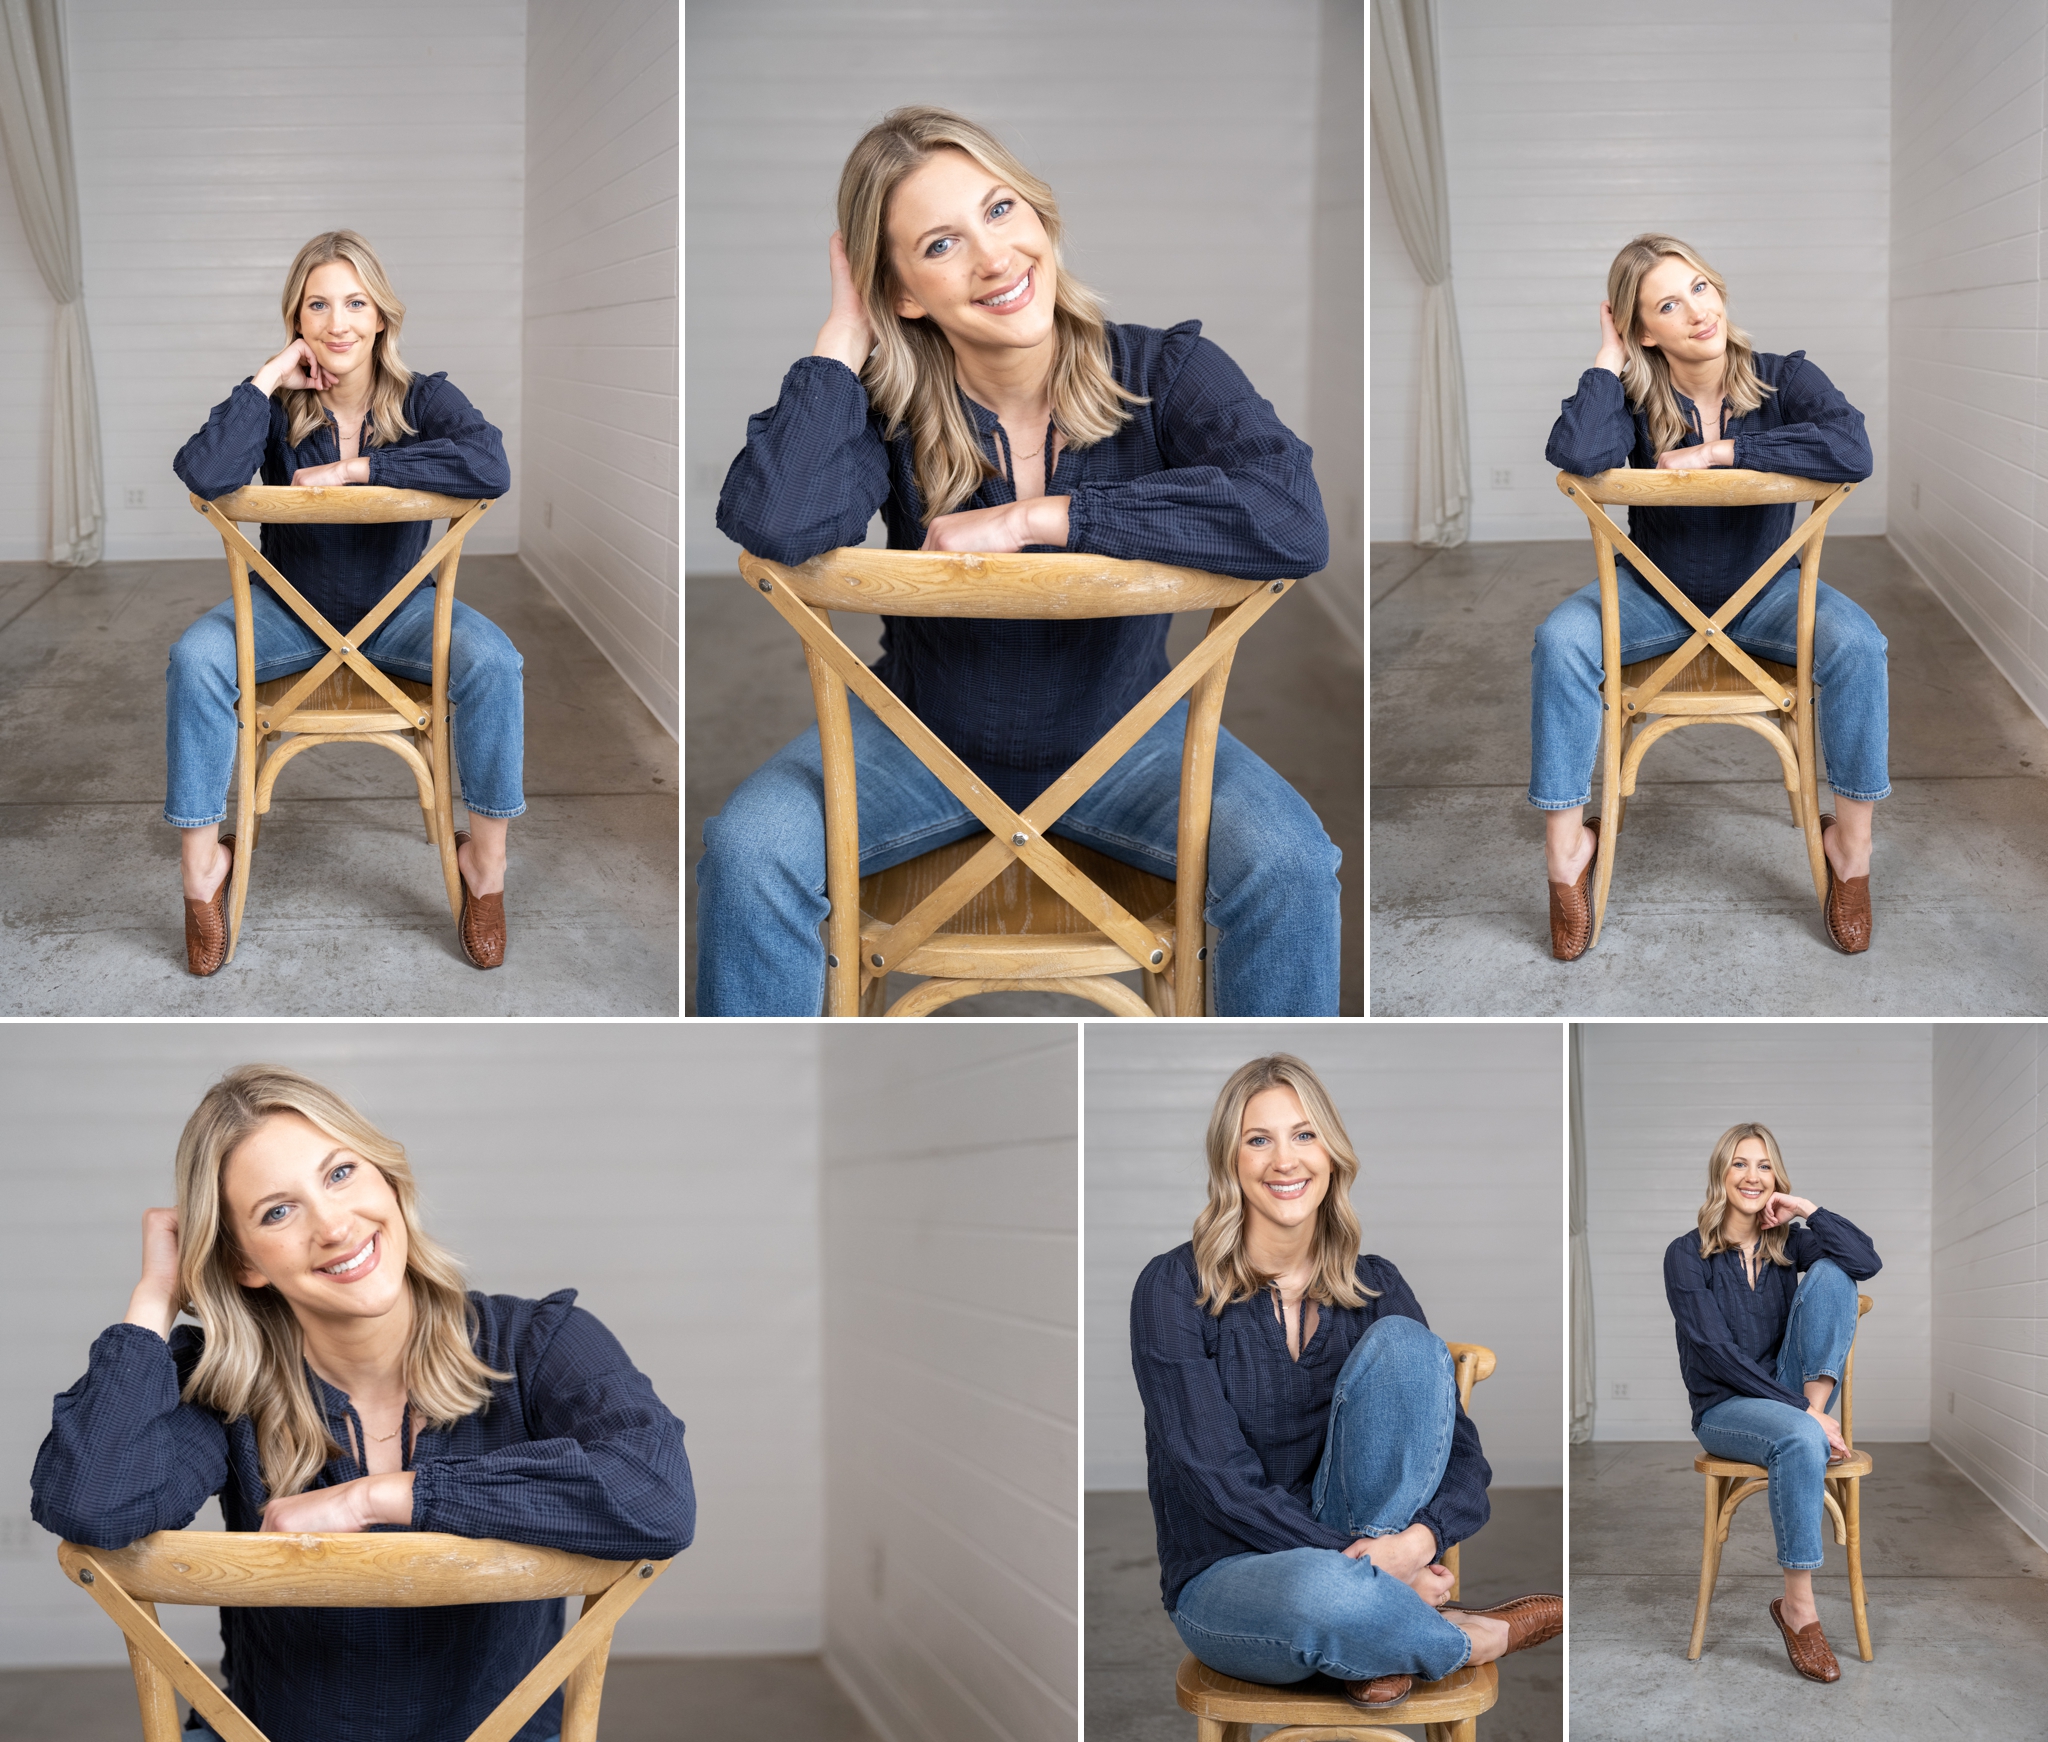 A collage of brand images of a female sitting on a wooden chair with varying facial expressions